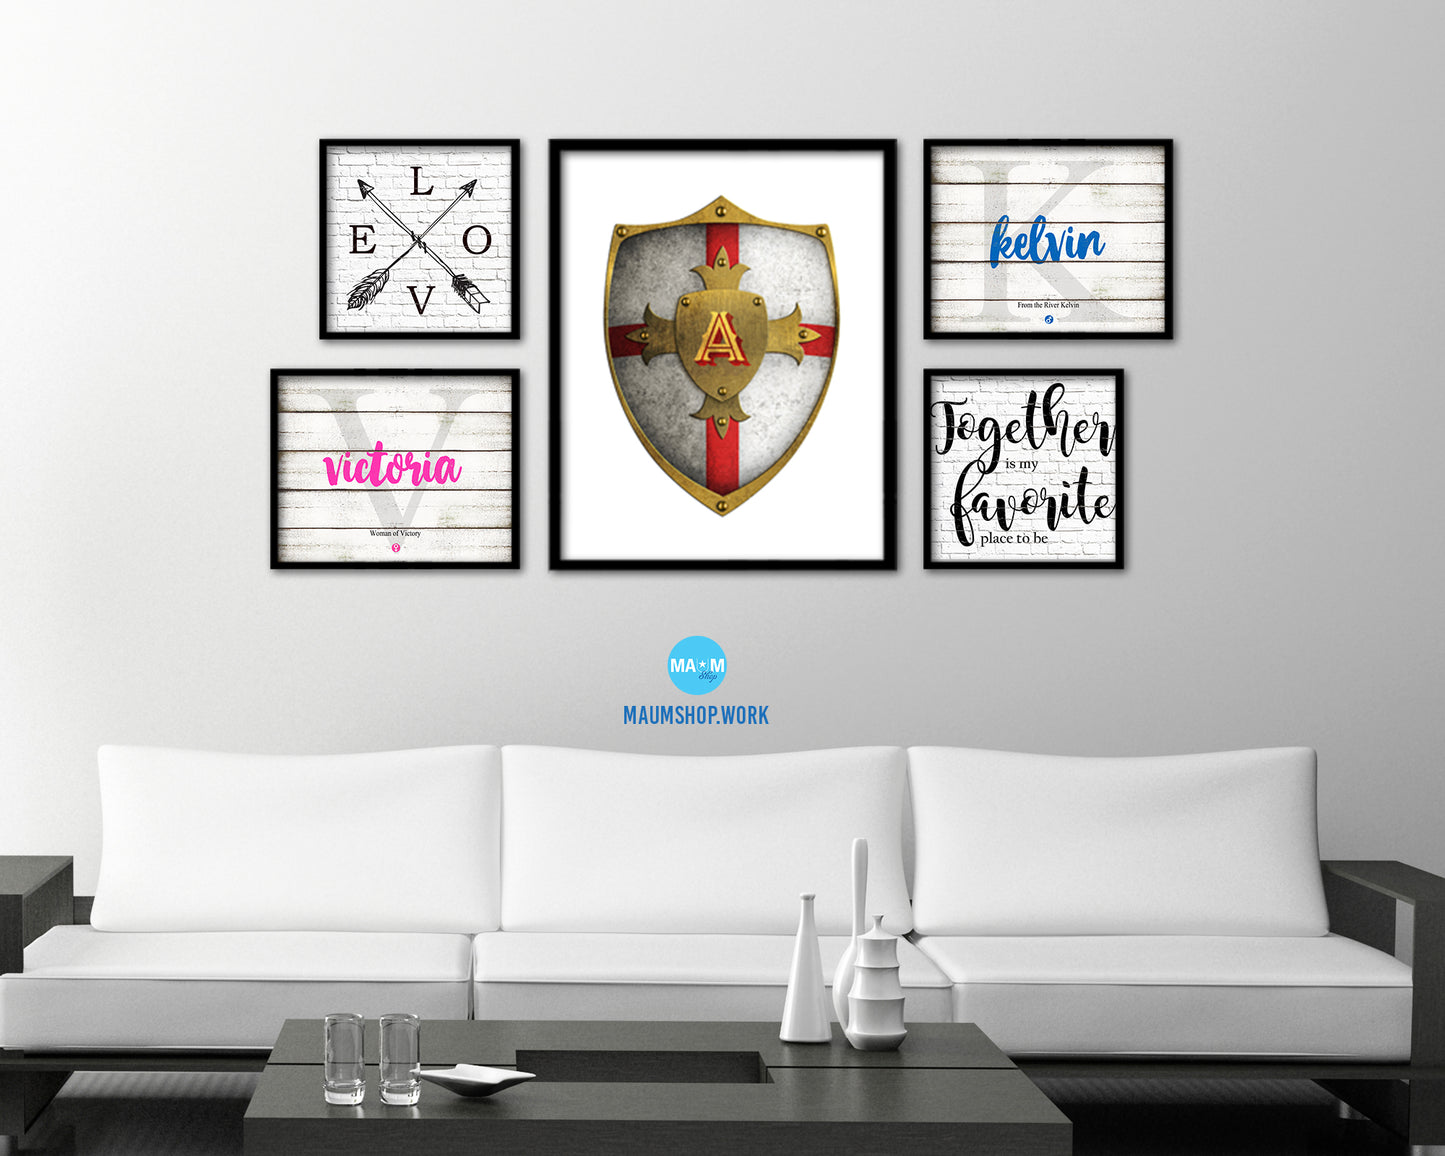 Letter A Medieval Castle Knight Shield Monogram Framed Print Wall Art Decor Gifts